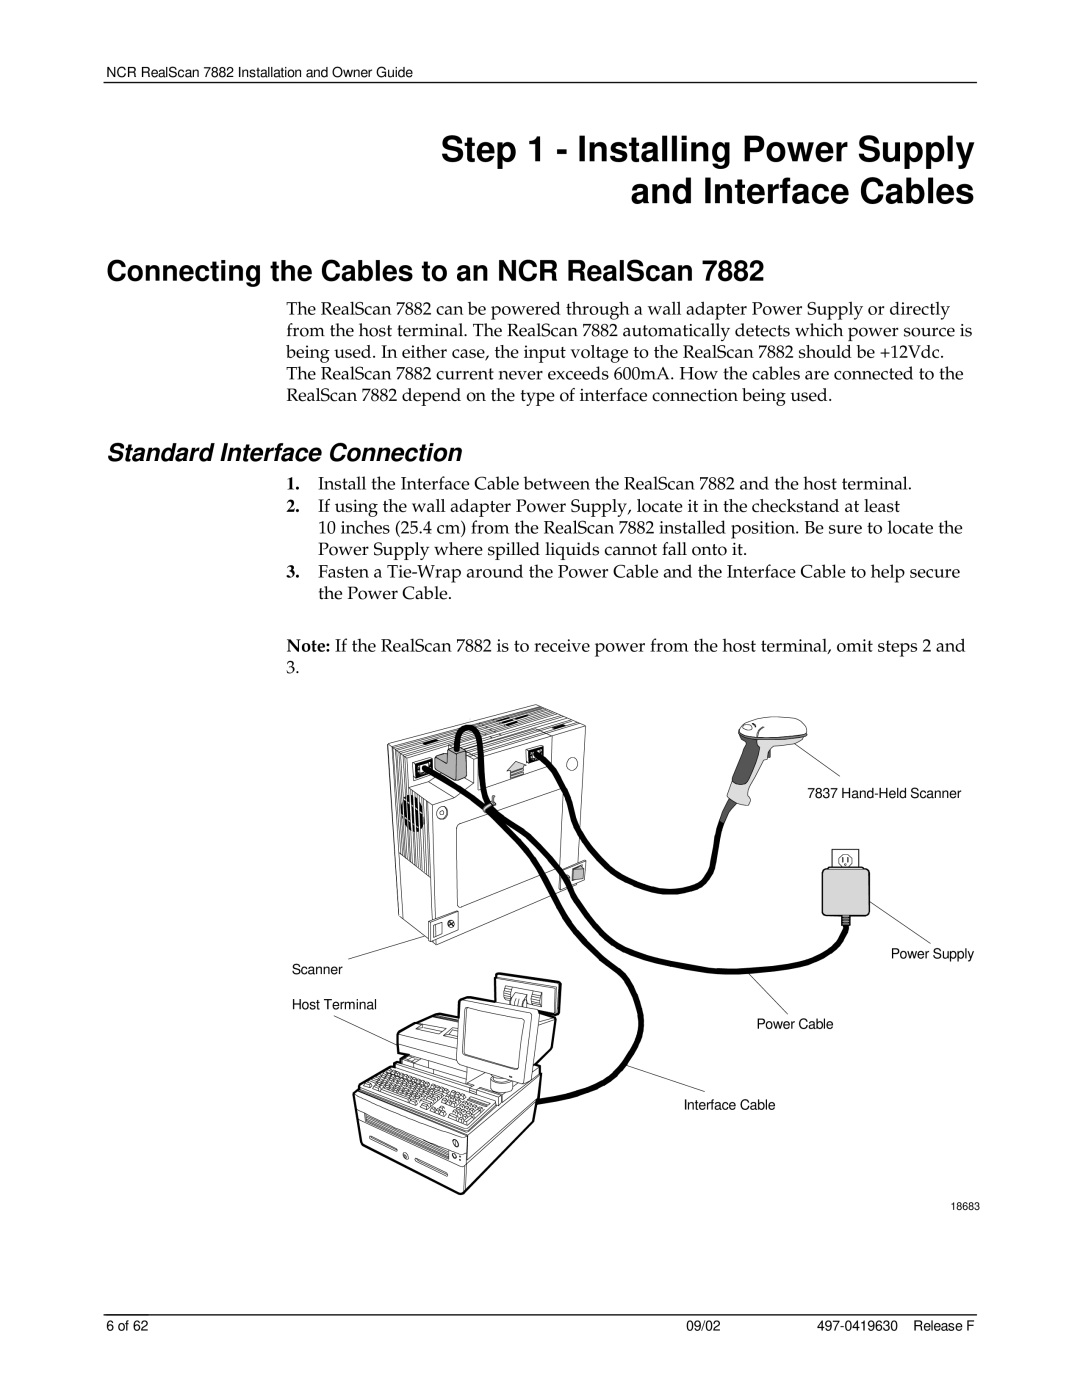 NCR 7882 manual Installing Power Supply and Interface Cables, Connecting the Cables to an NCR RealScan 